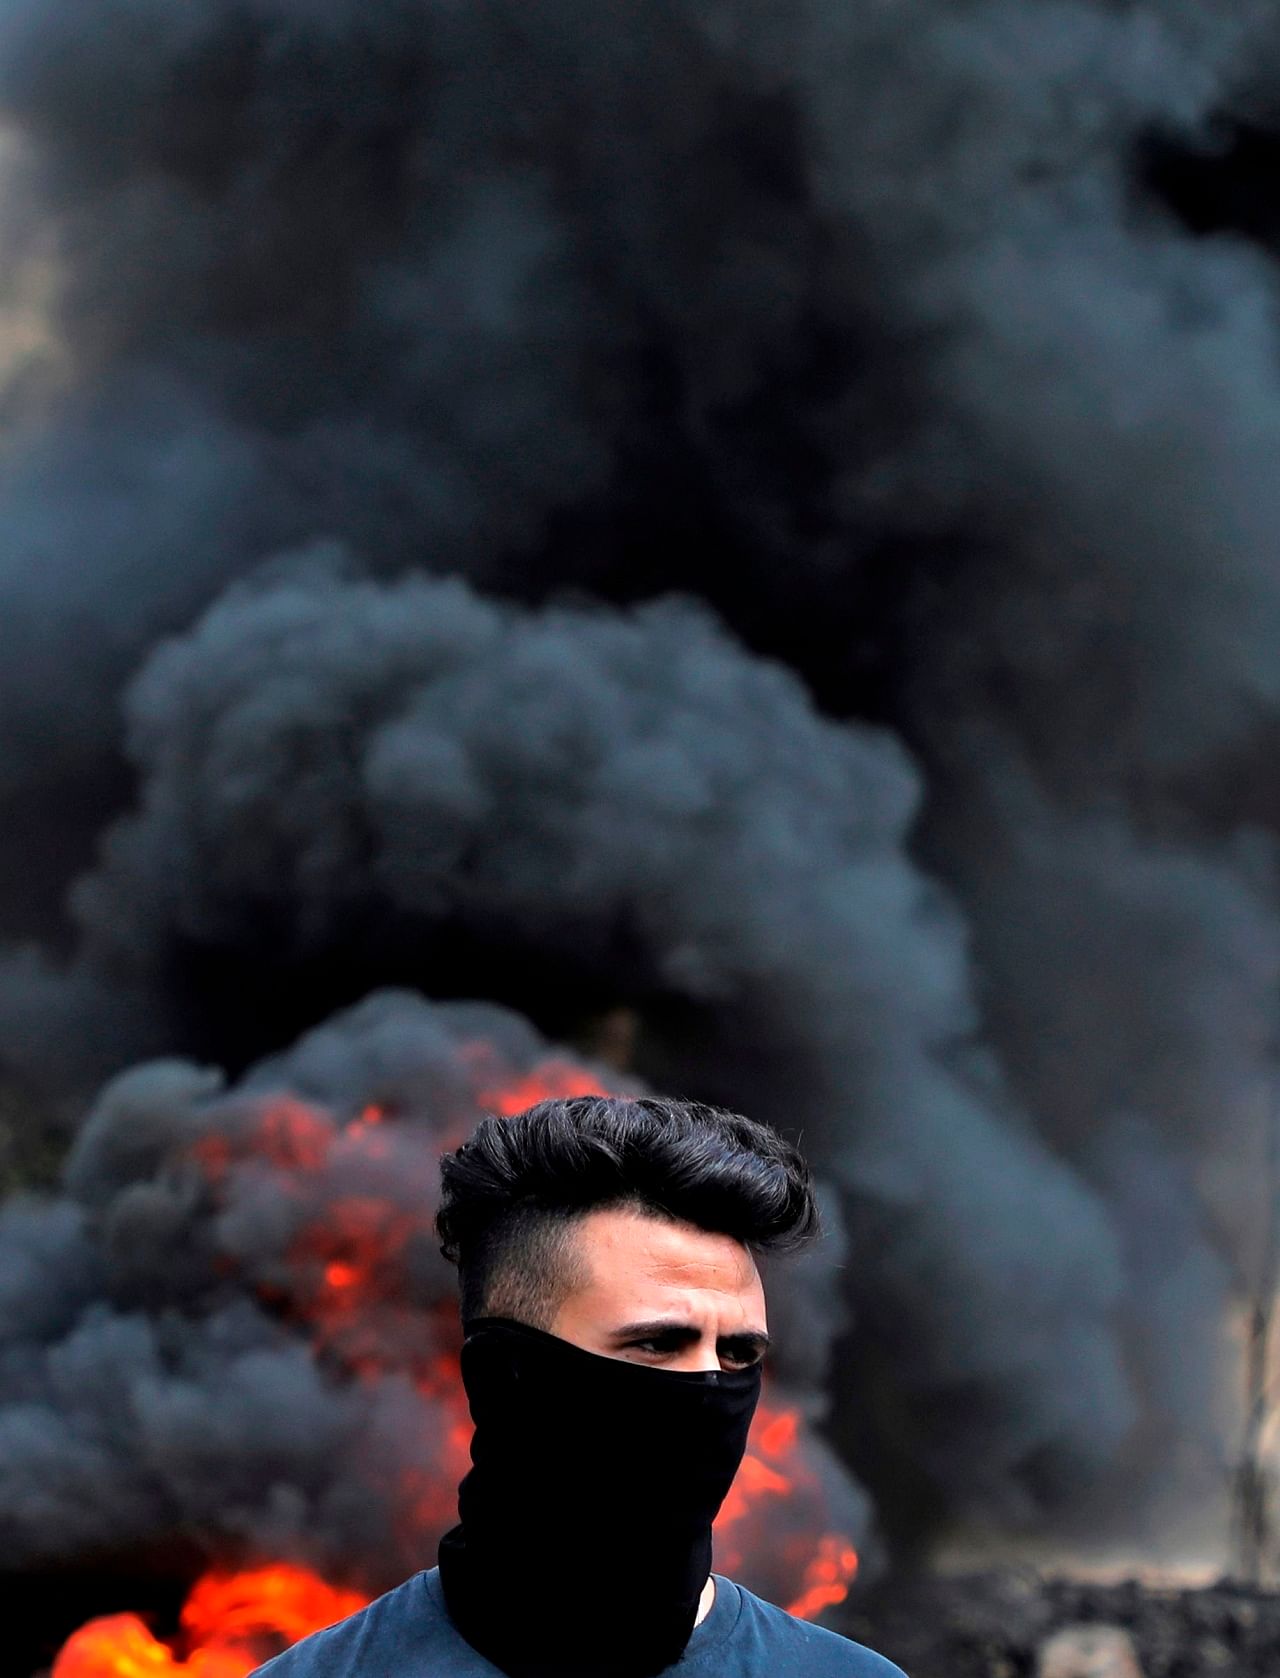 A Palestinian demonstrator stands in front of burning tyres during clashes following a weekly protest against the expropriation of Palestinian land by Israel